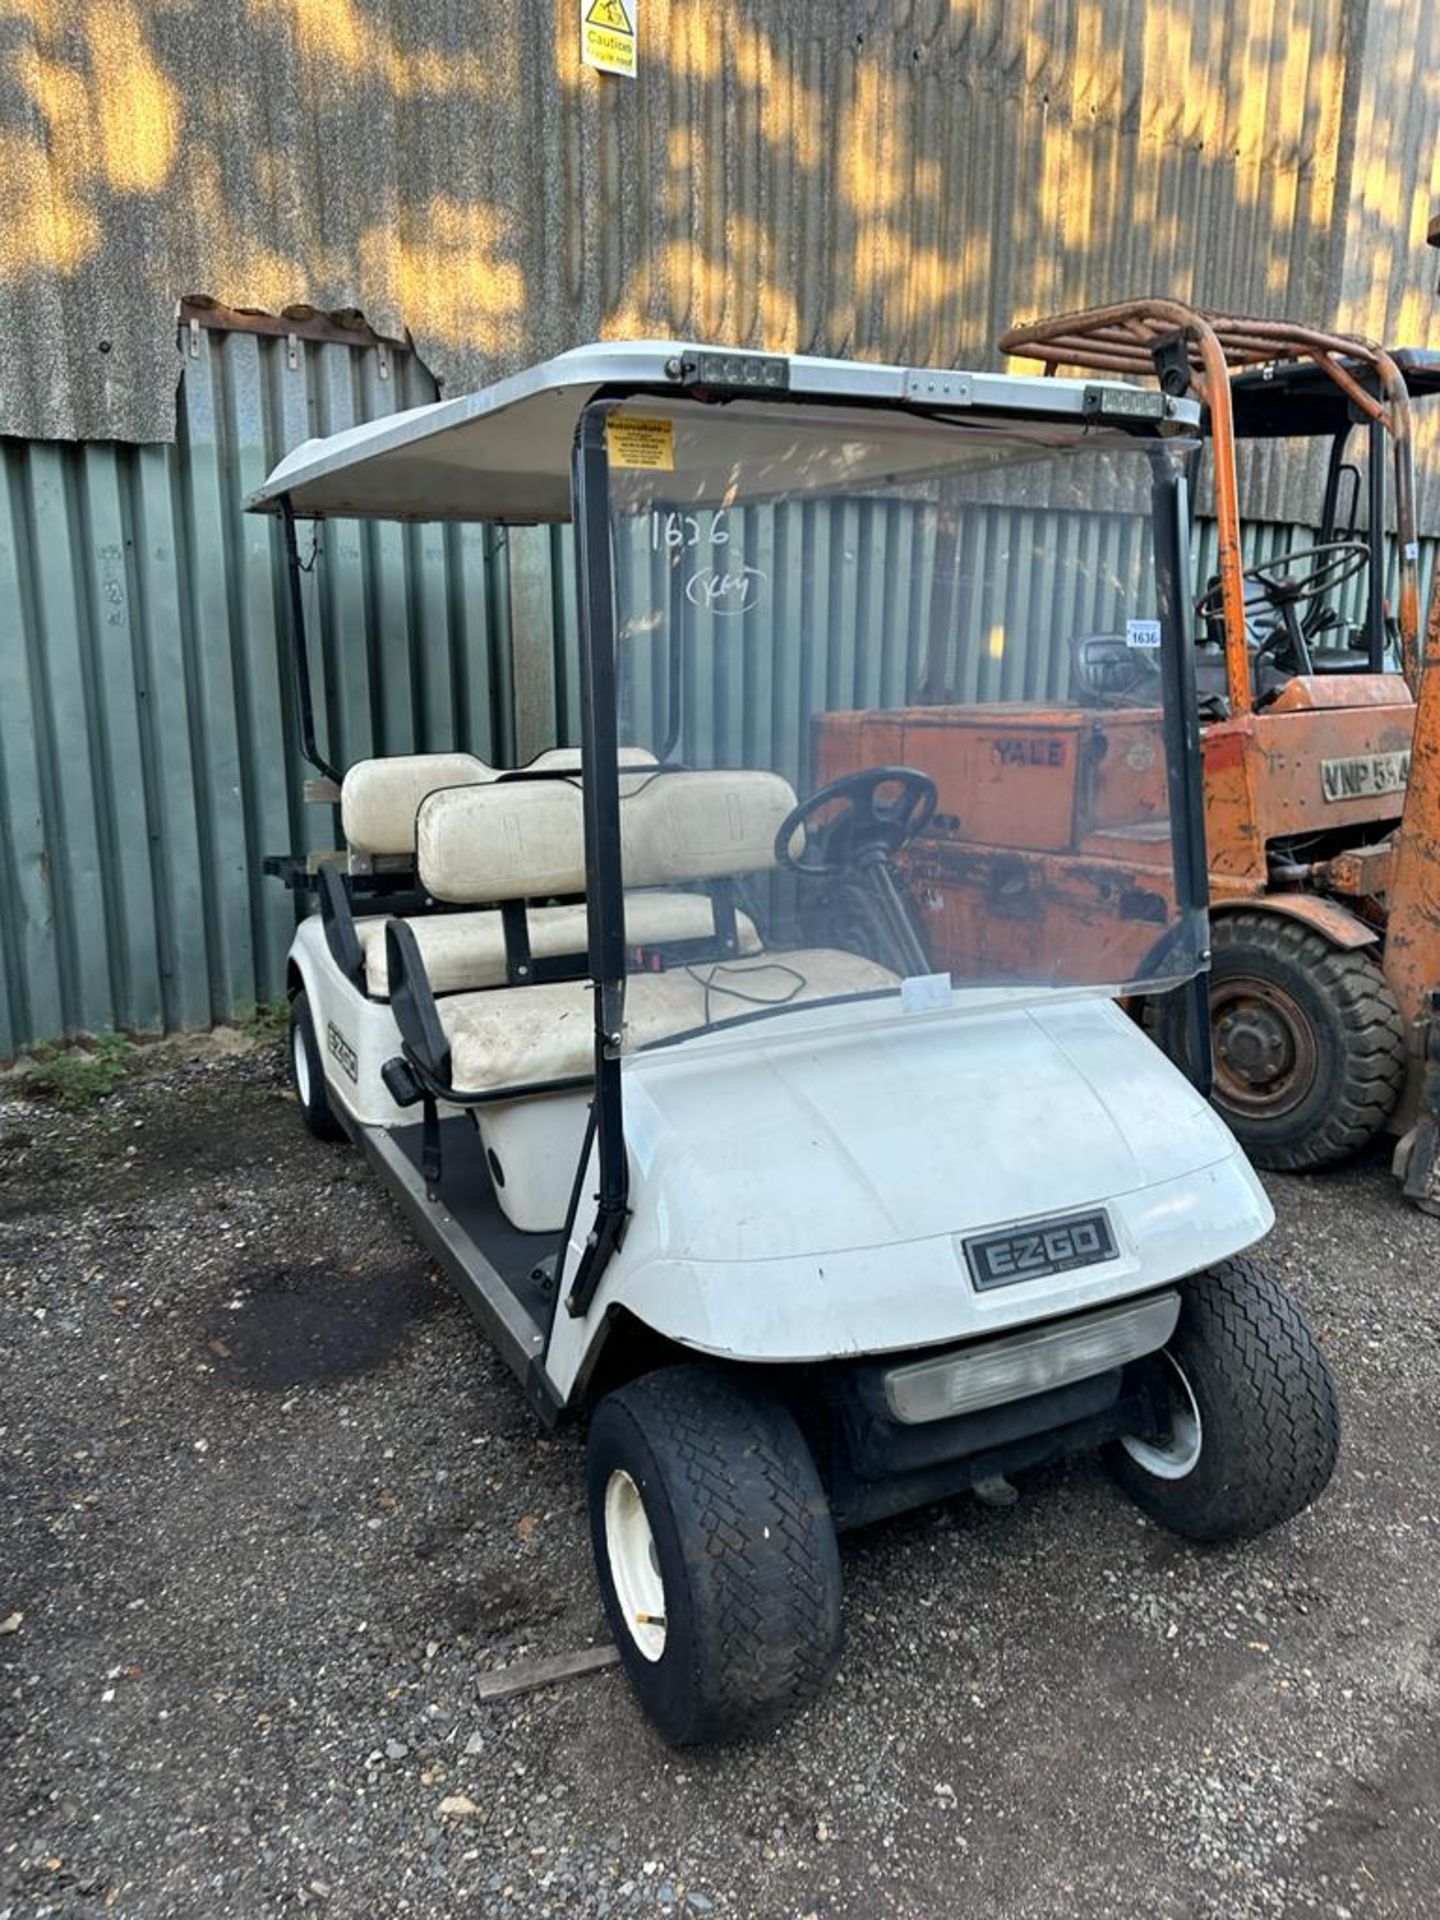 EZGO SHUTTLE4 LONG WHEEL BASE ELECTRIC GOLF BUGGY WITH CHARGER. BATTERY FLAT, UNTESTED. WITH KEY. - Image 4 of 5